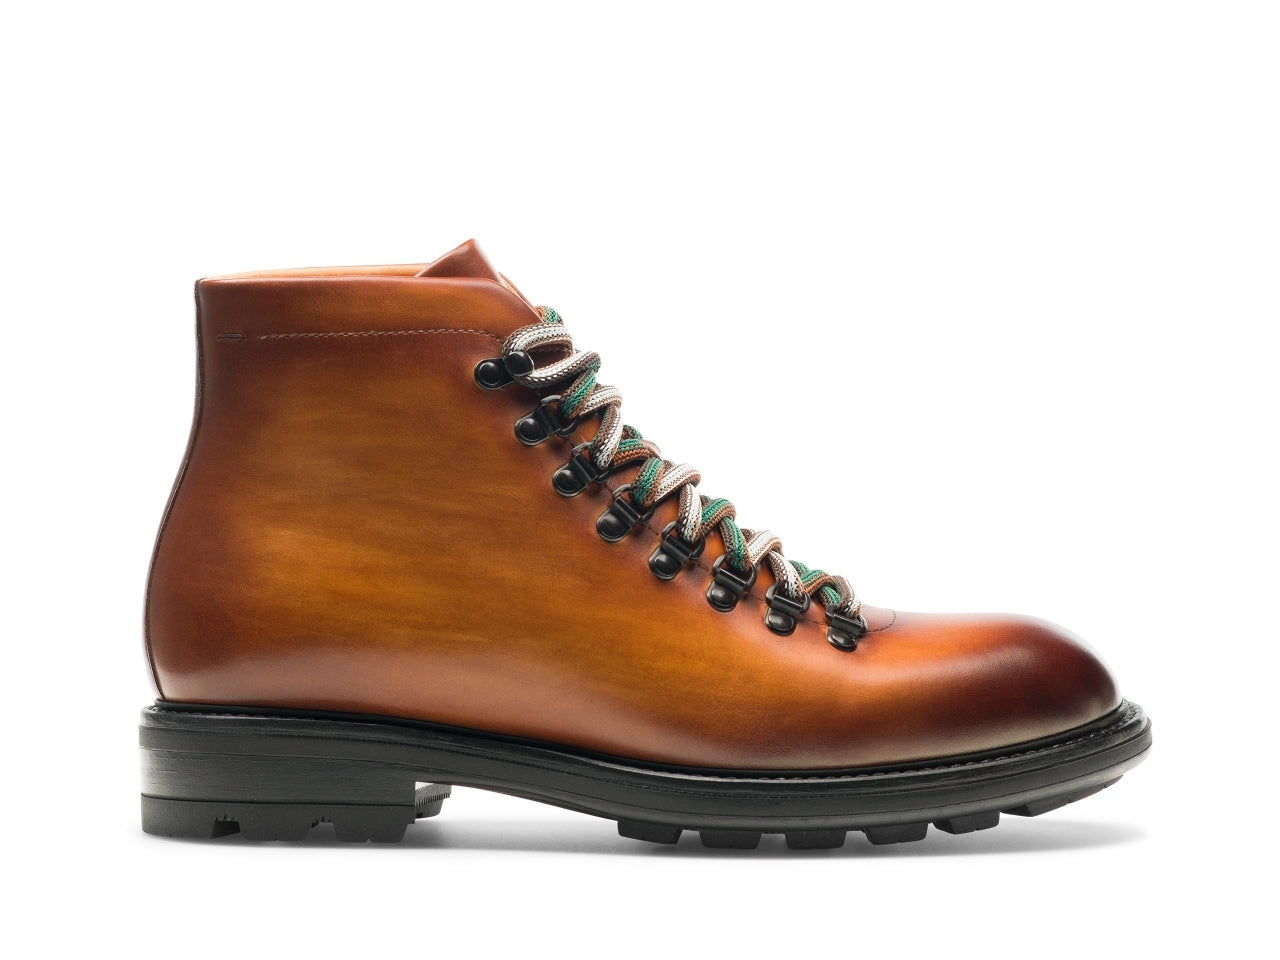 Brown men's Magnanni Montana hiking boot on a white background, side view.